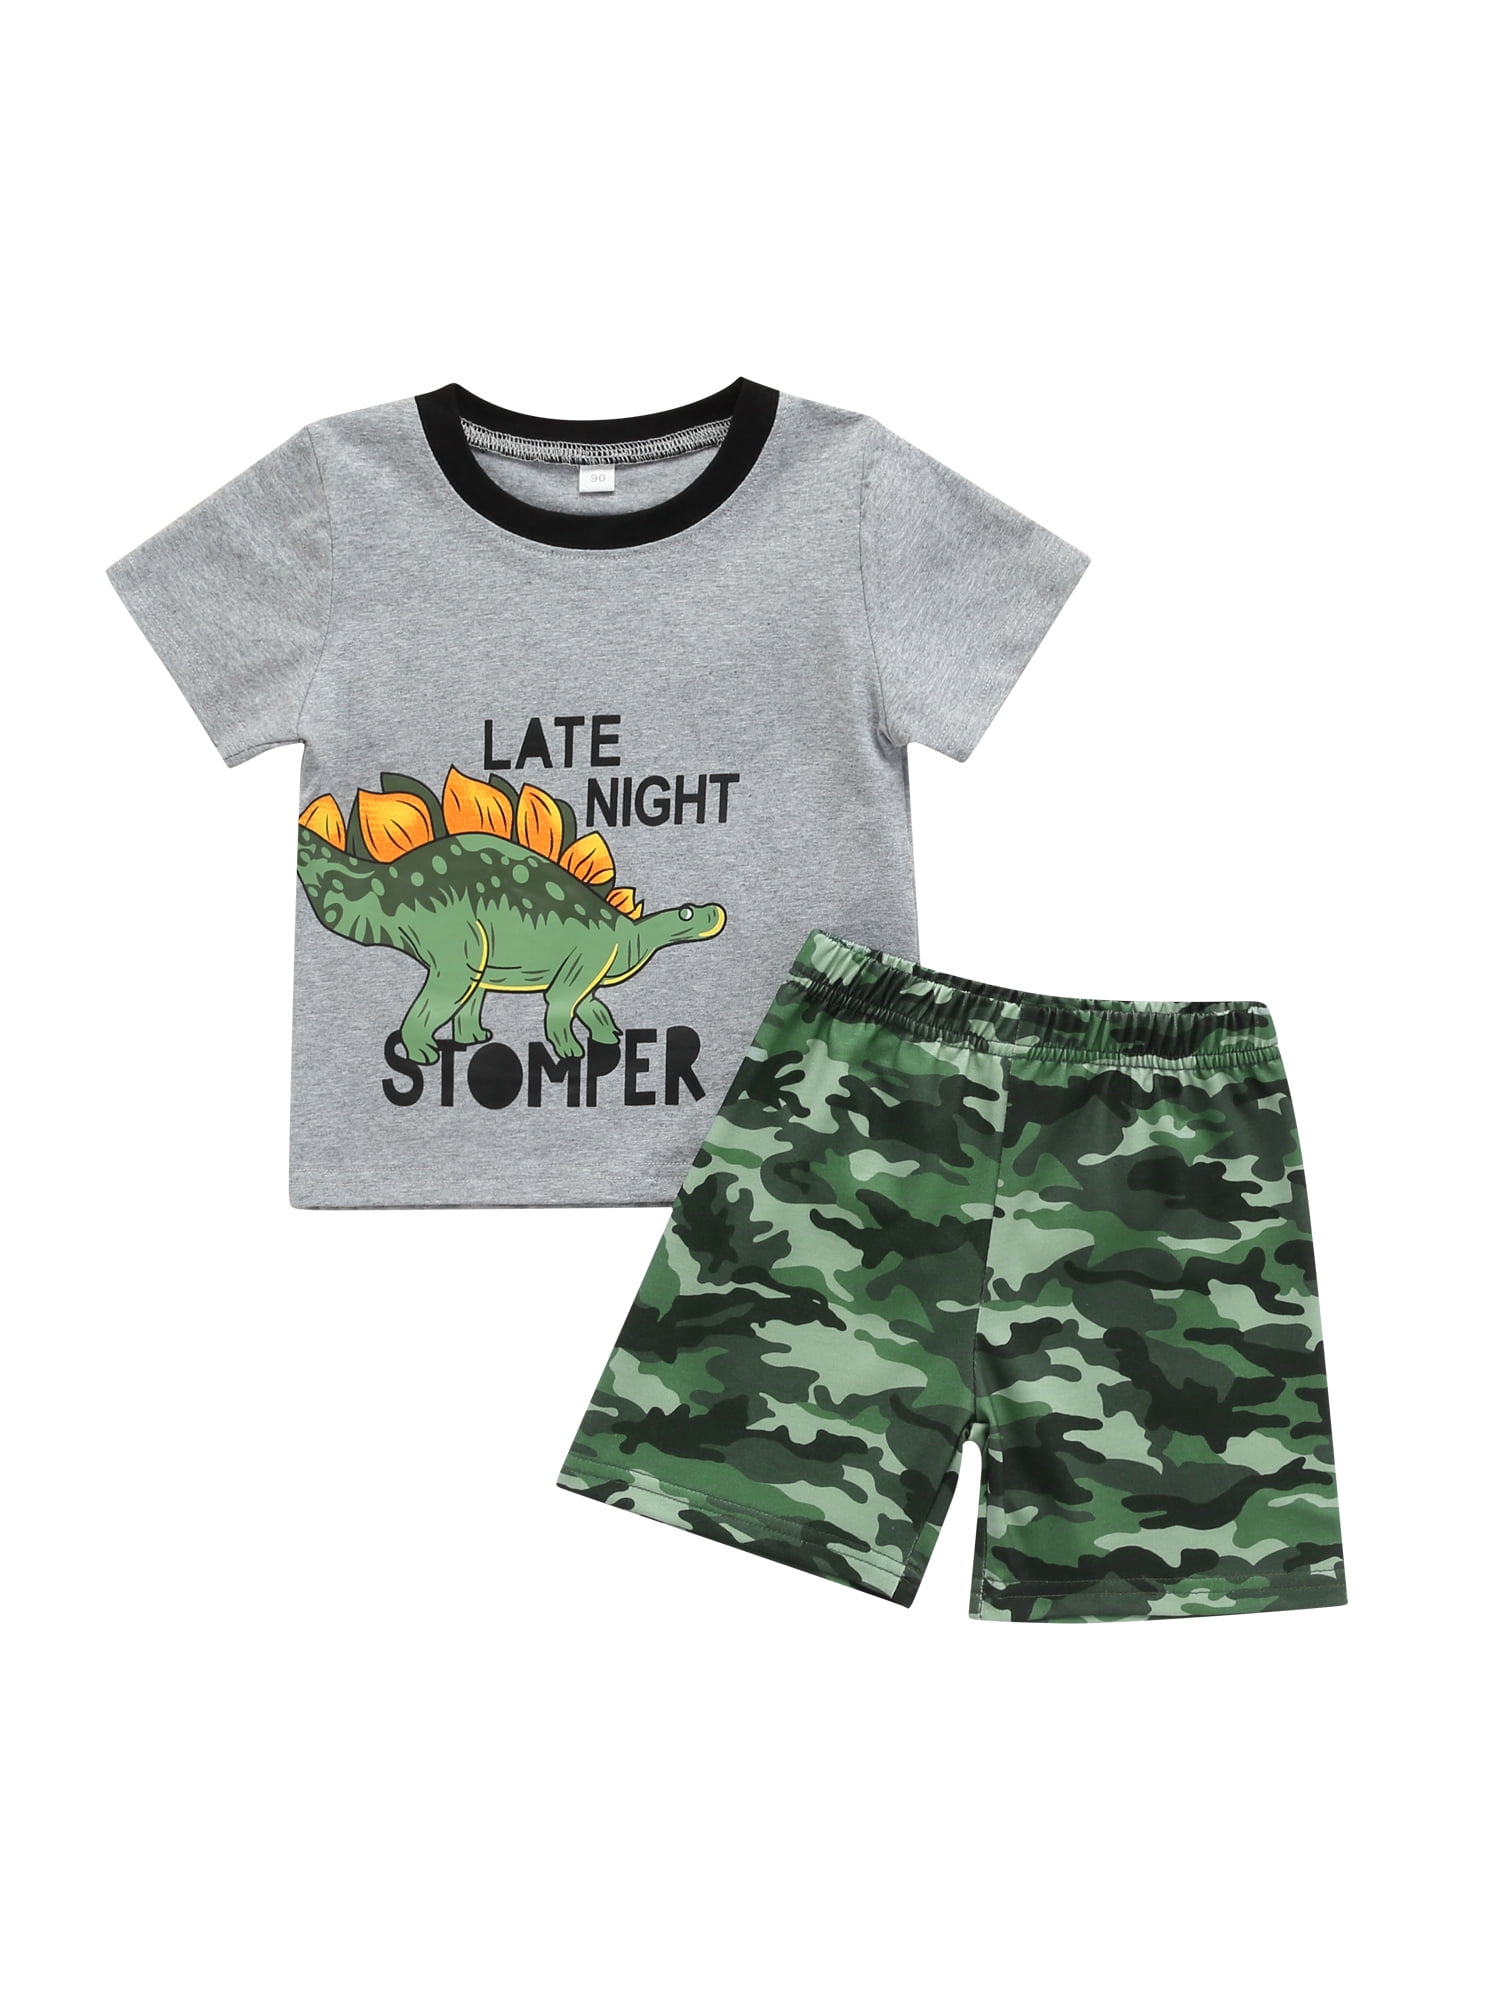 Toddler Kids Baby Boys Letter T shirt Tops+Camouflage Shorts Outfits Clothes Set 